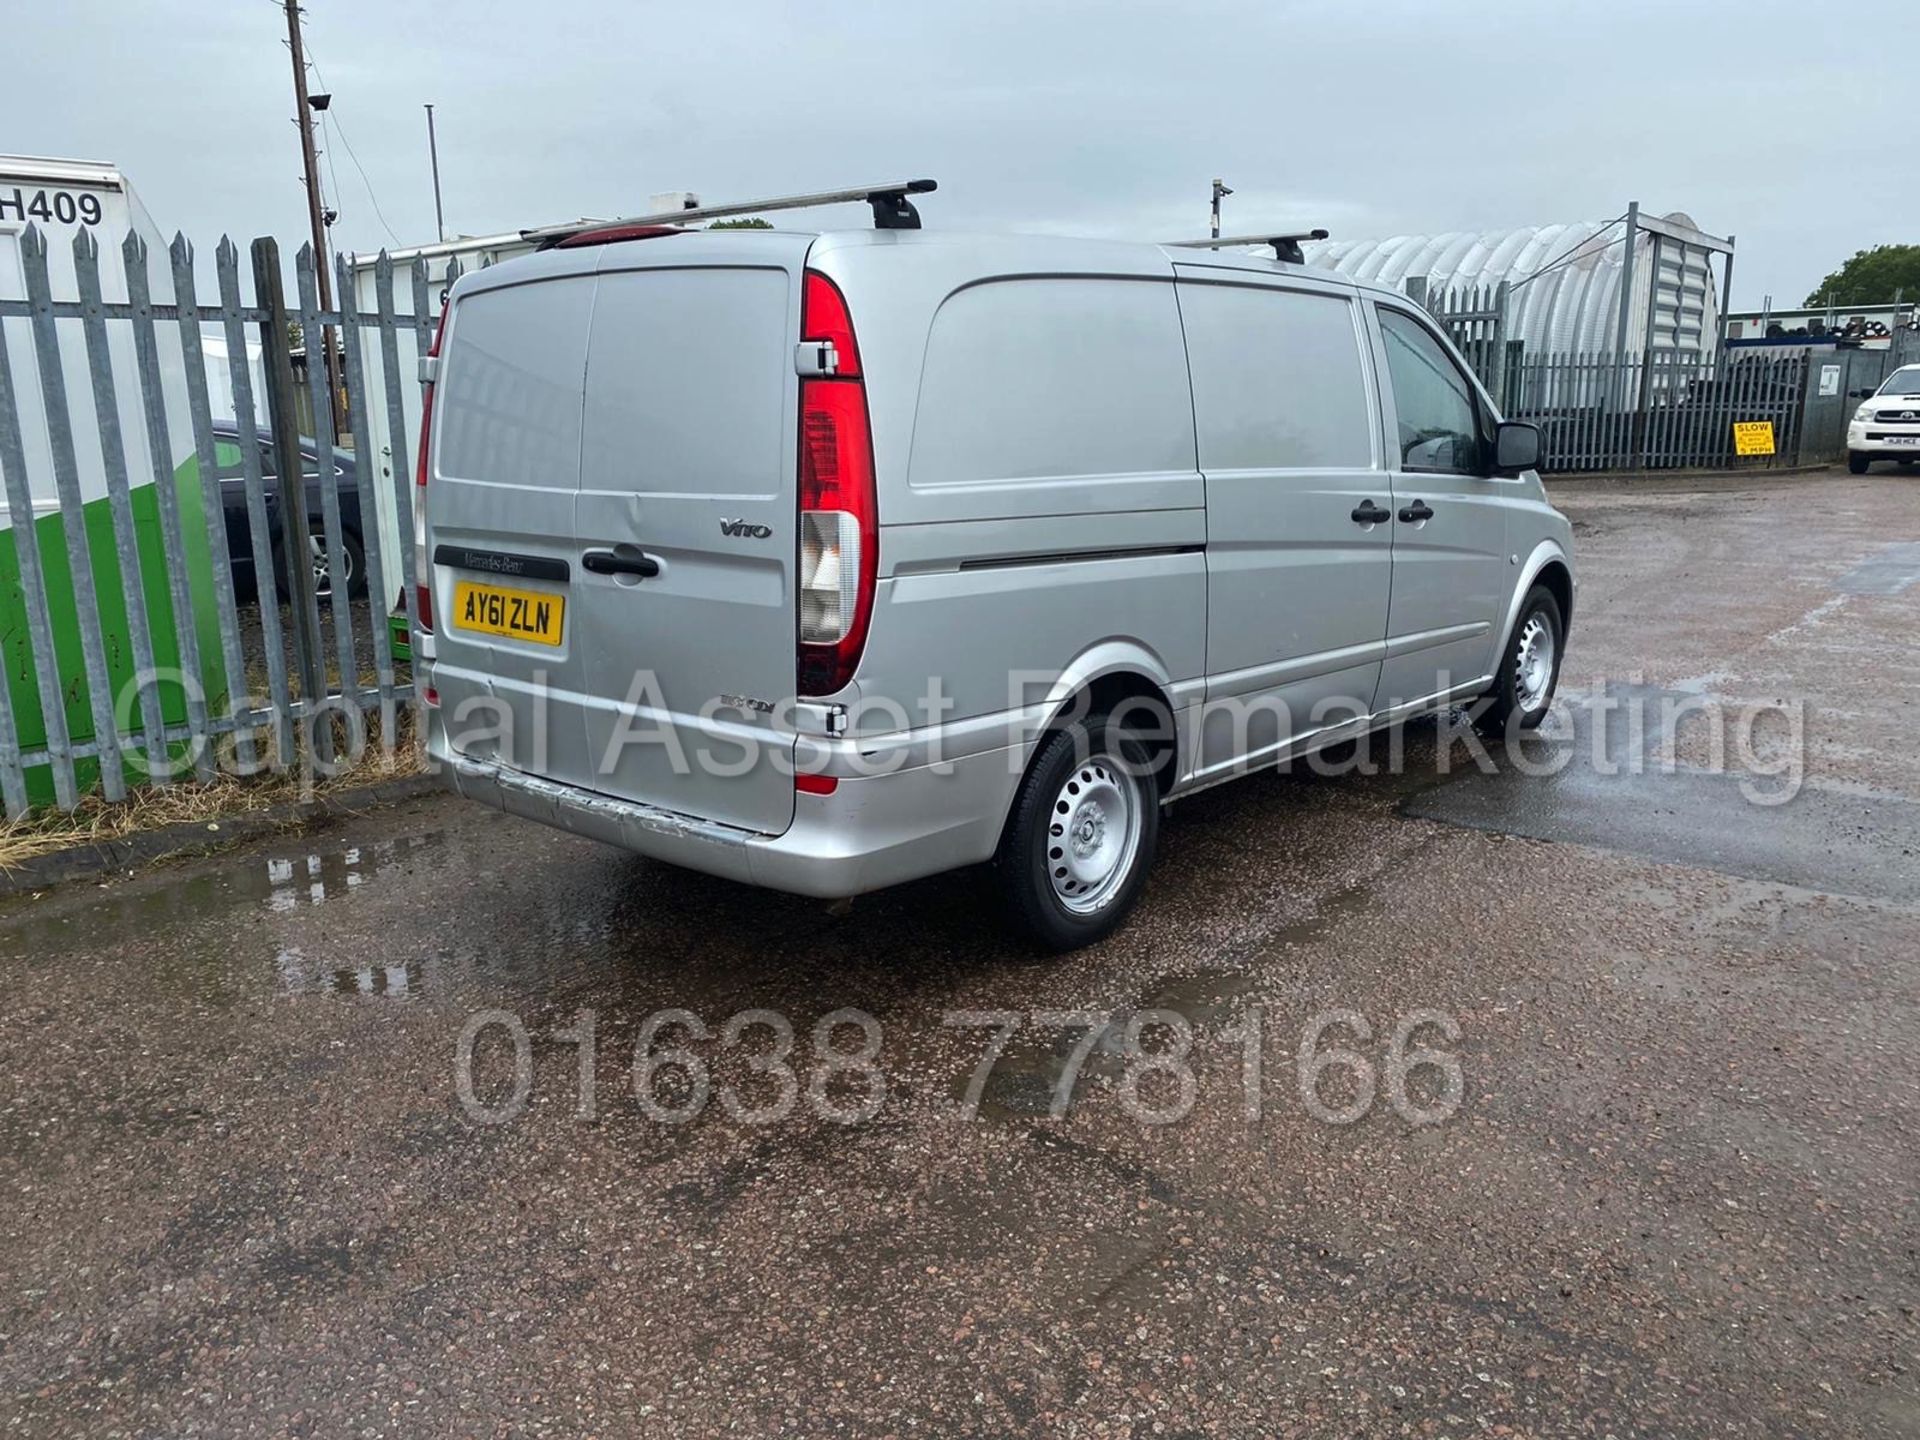 On Sale MERCEDES-BENZ VITO 113 CDI *LWB - VAN* (2012 MODEL) '130 BHP - 6 SPEED' *AIR CON - LEATHER* - Image 7 of 17